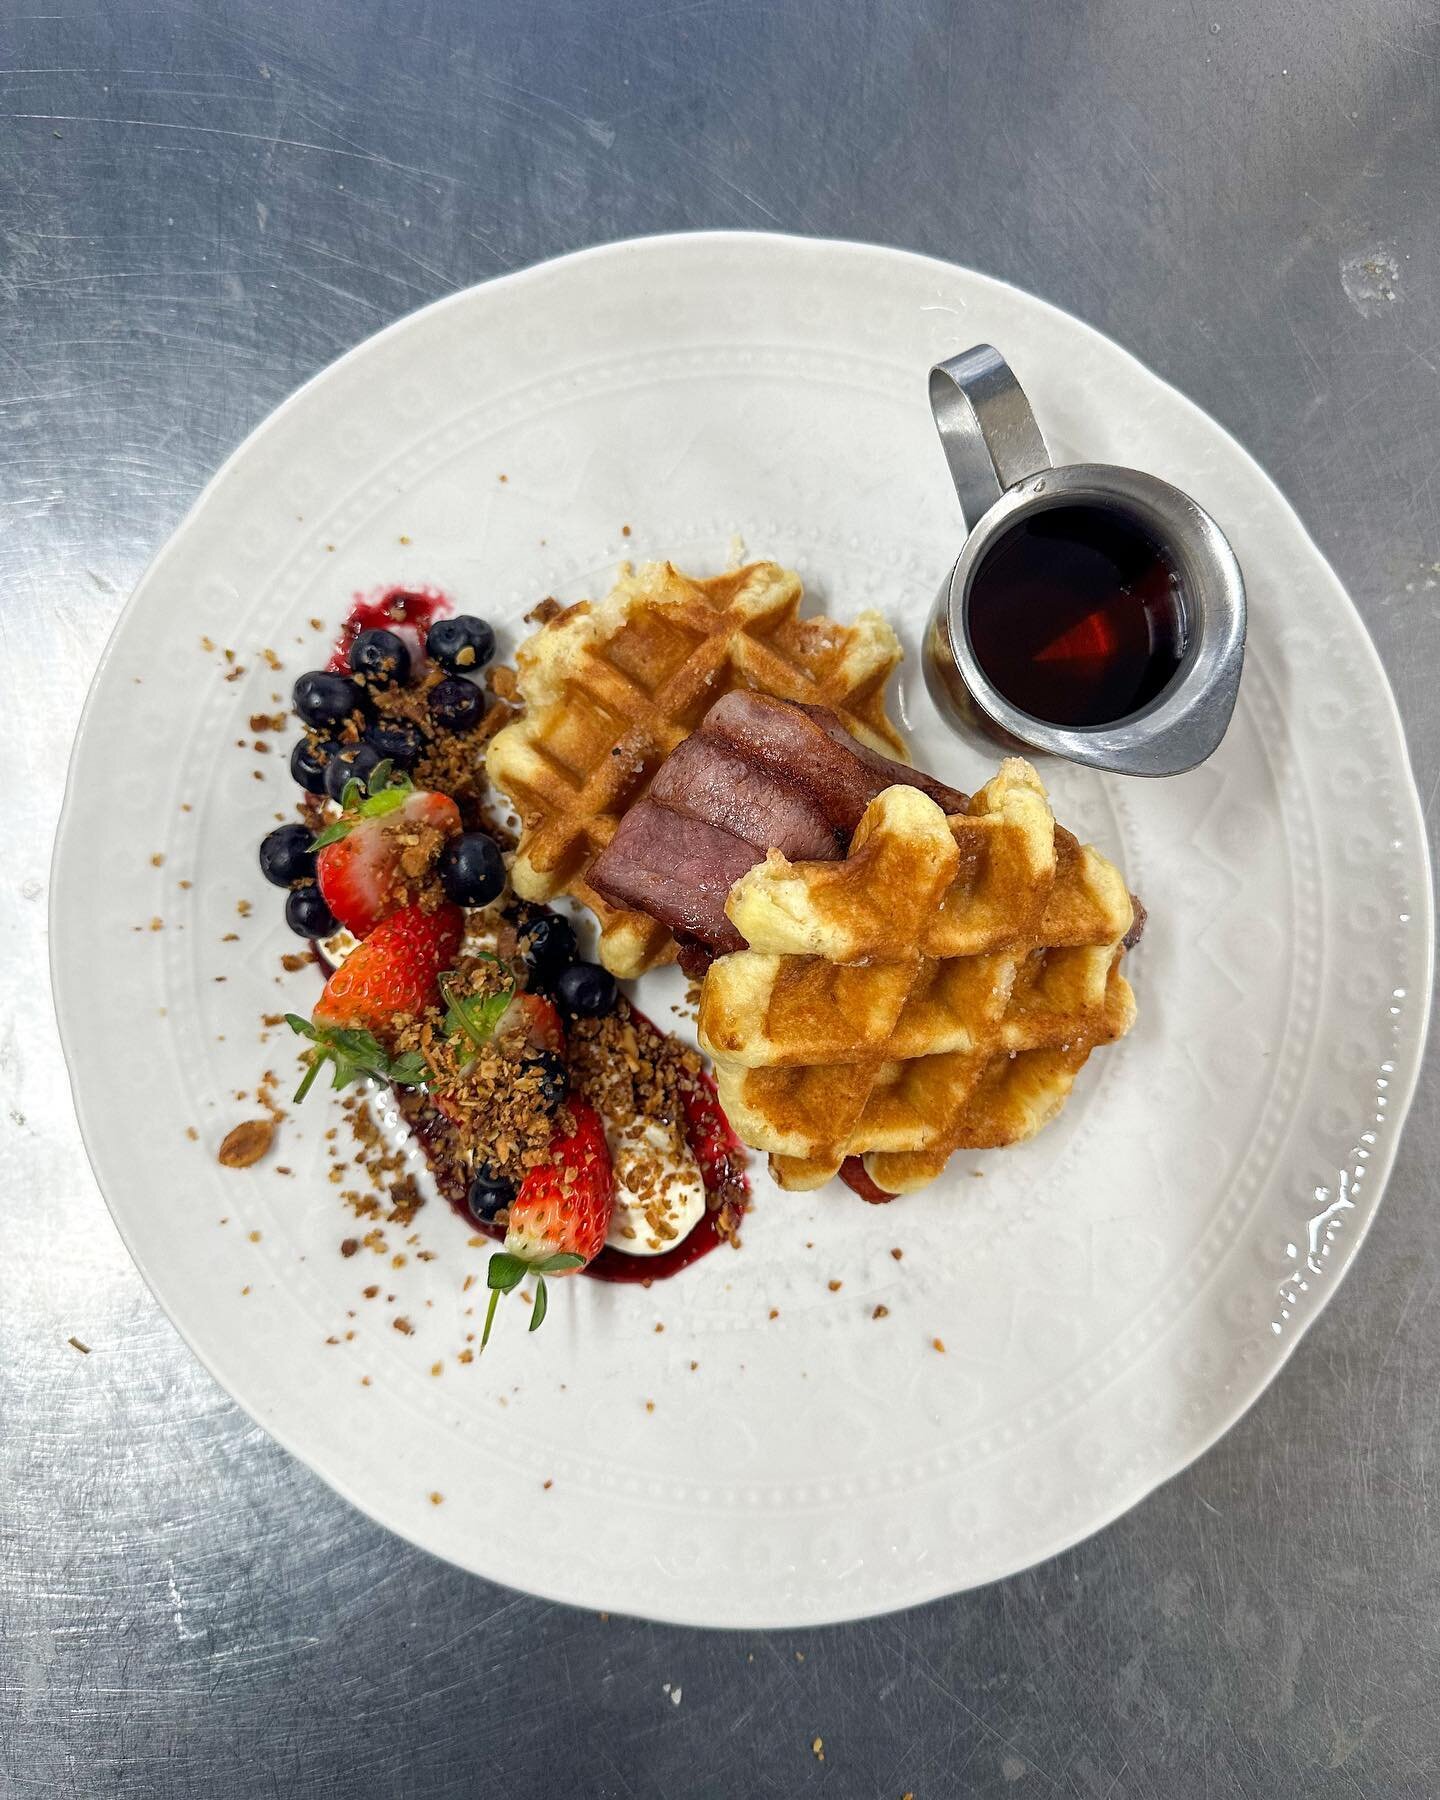 Belgian waffles with bacon, vanilla whipped cream, strawberries 🍓 blueberries 🫐 and maple syrup 🍁 topped with our sweet nutty crumble on the special board this week for school holidays #thefig #whitianga #waffles #schoolholidayspecial#mercurybay #